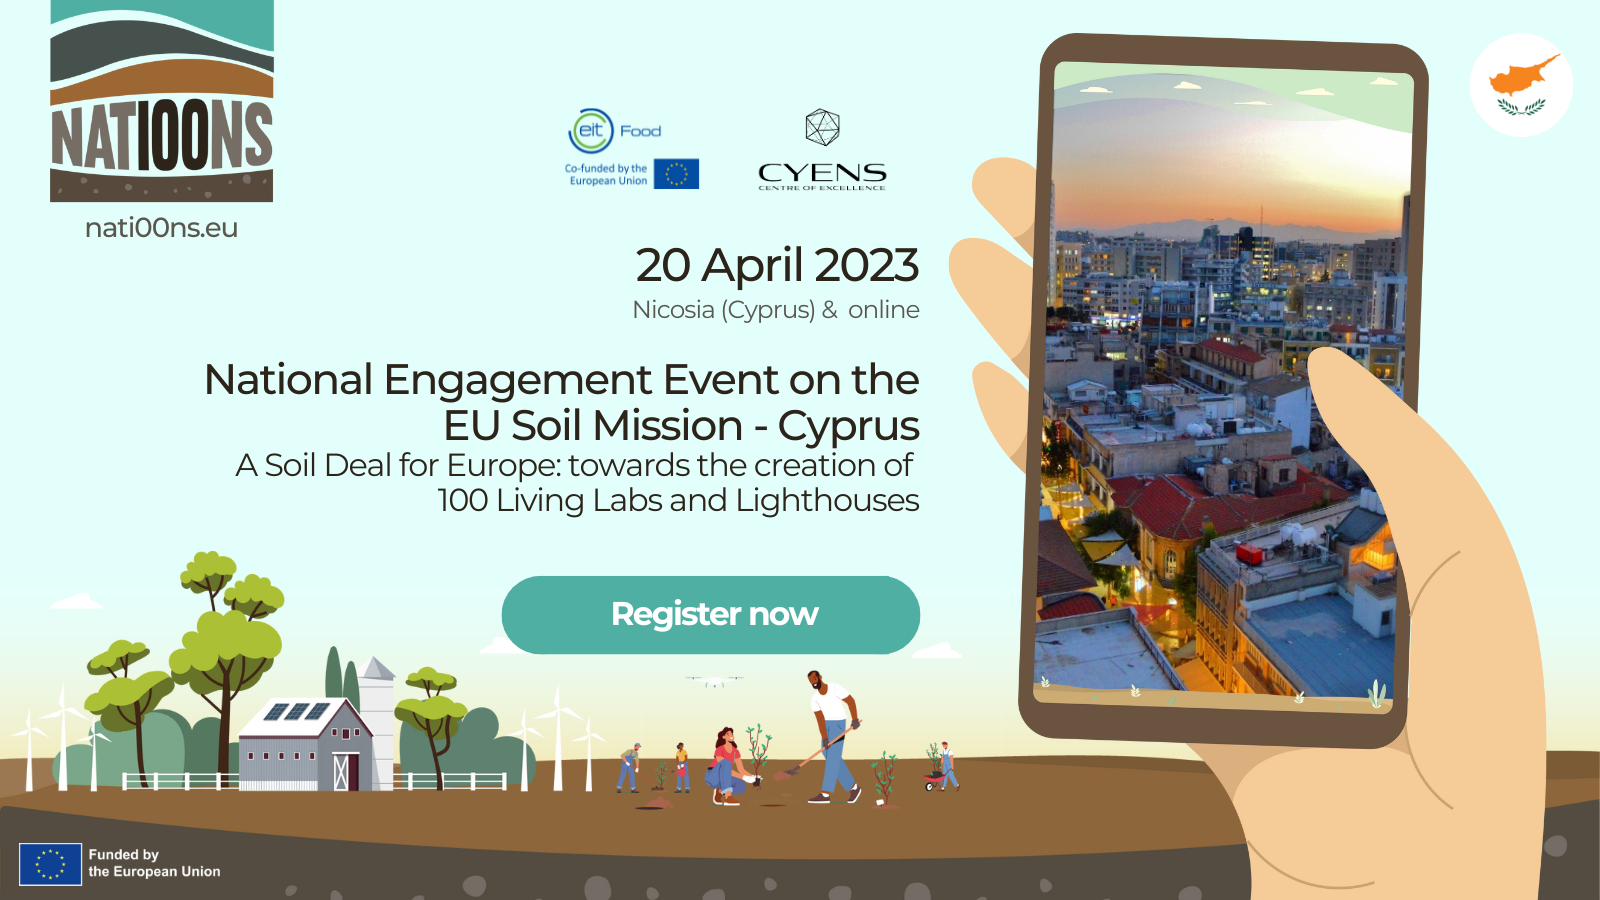 National Engagement Event on the EU Soil Mission - Cyprus